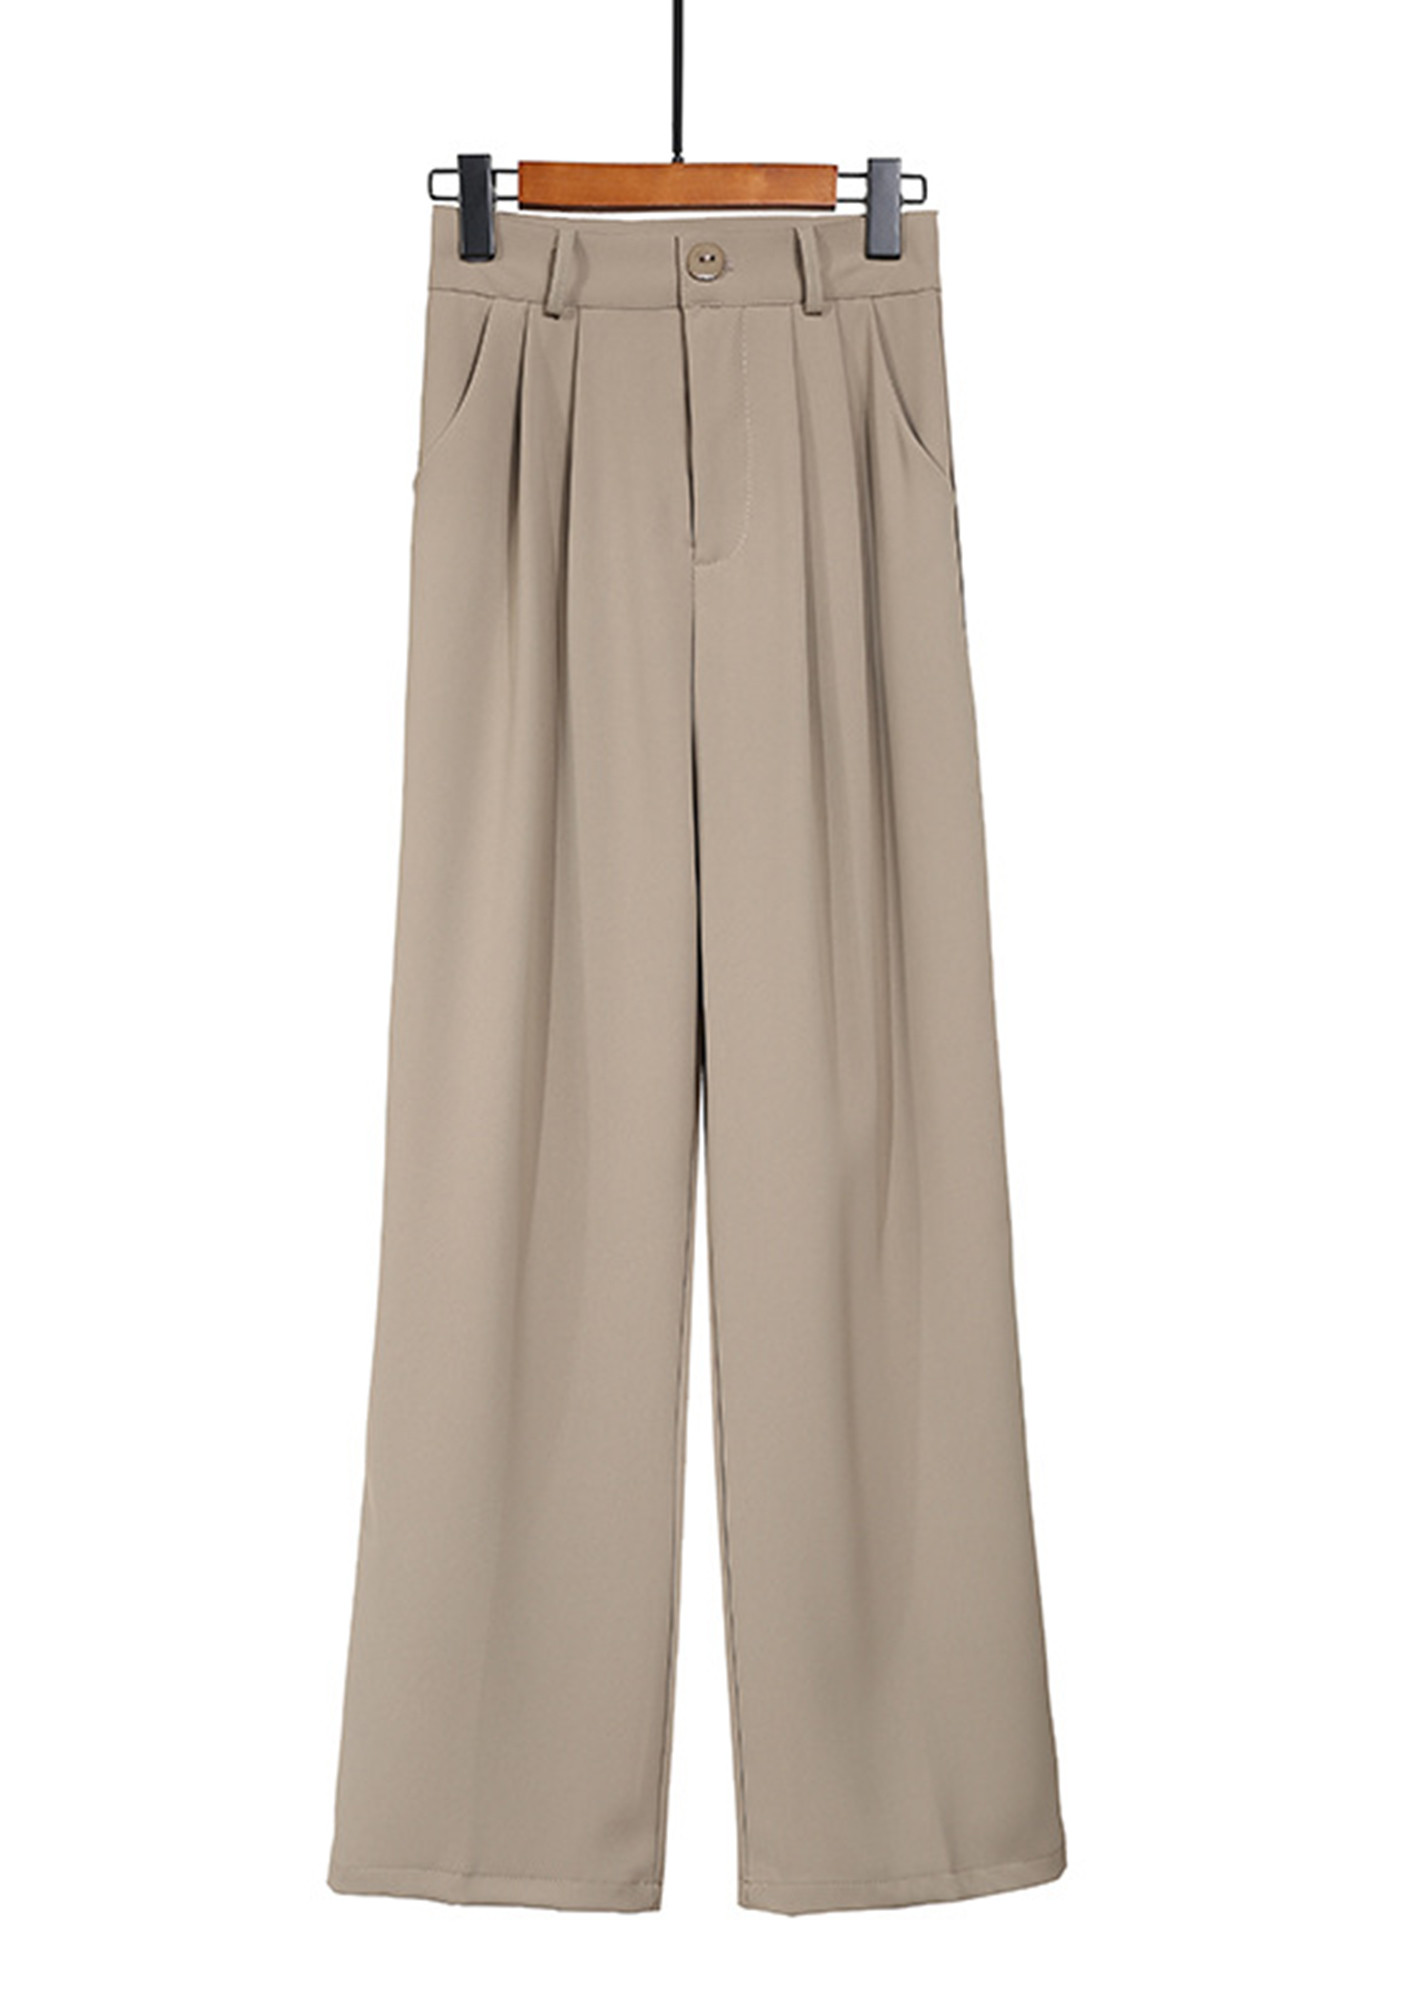 Buy Linen Draped Pants by ISTA at Ogaan Market Online Shopping Site